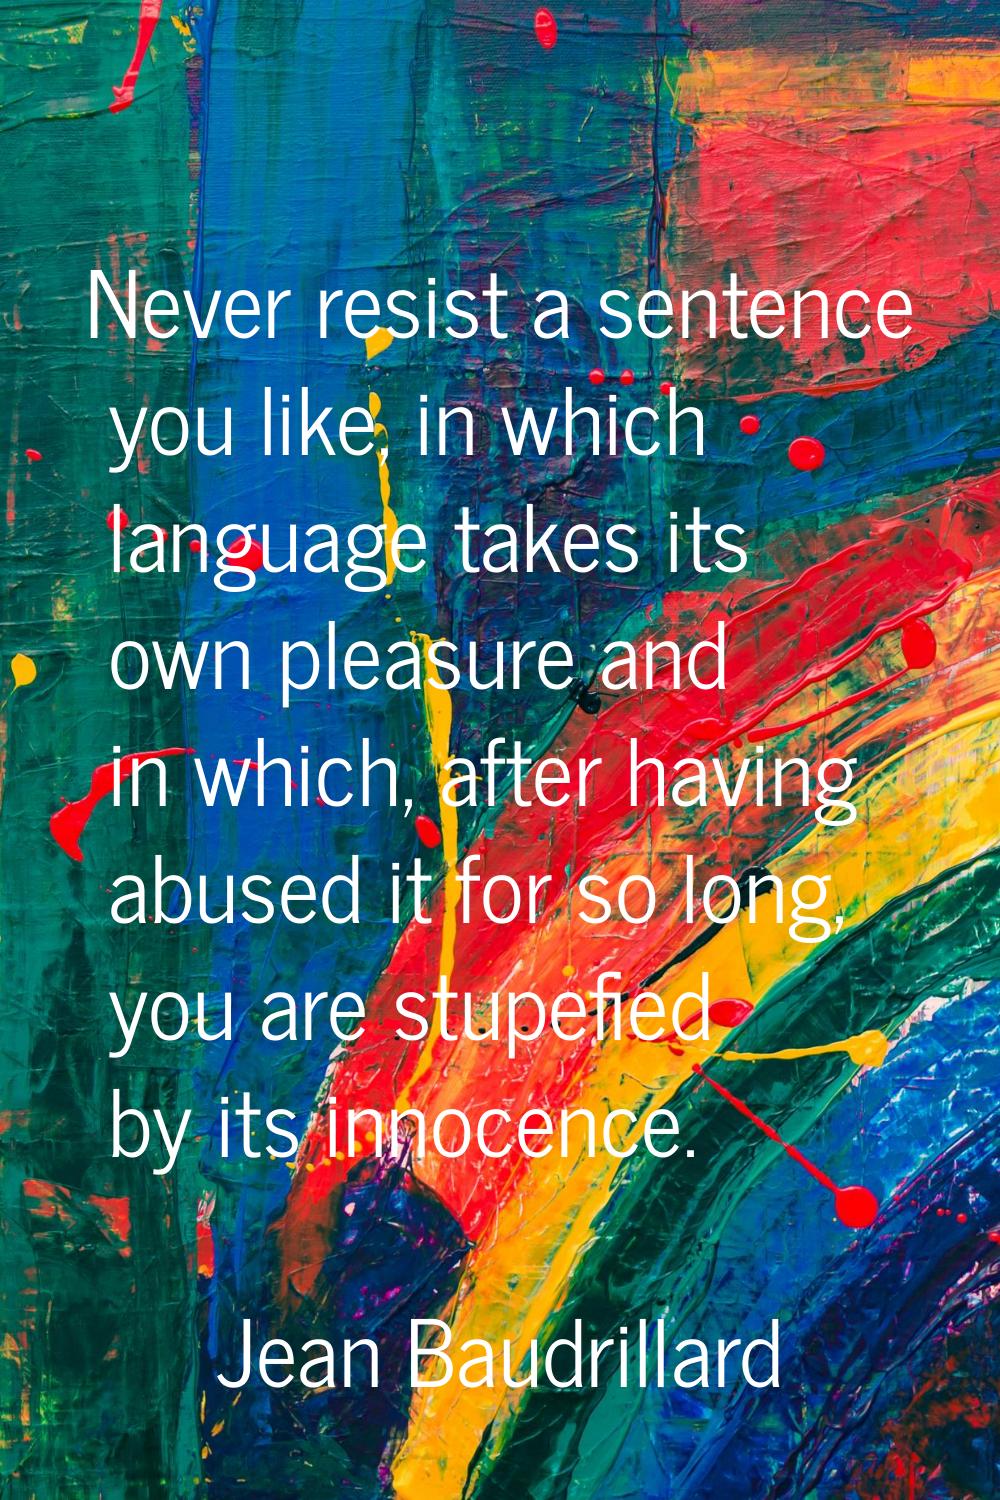 Never resist a sentence you like, in which language takes its own pleasure and in which, after havi